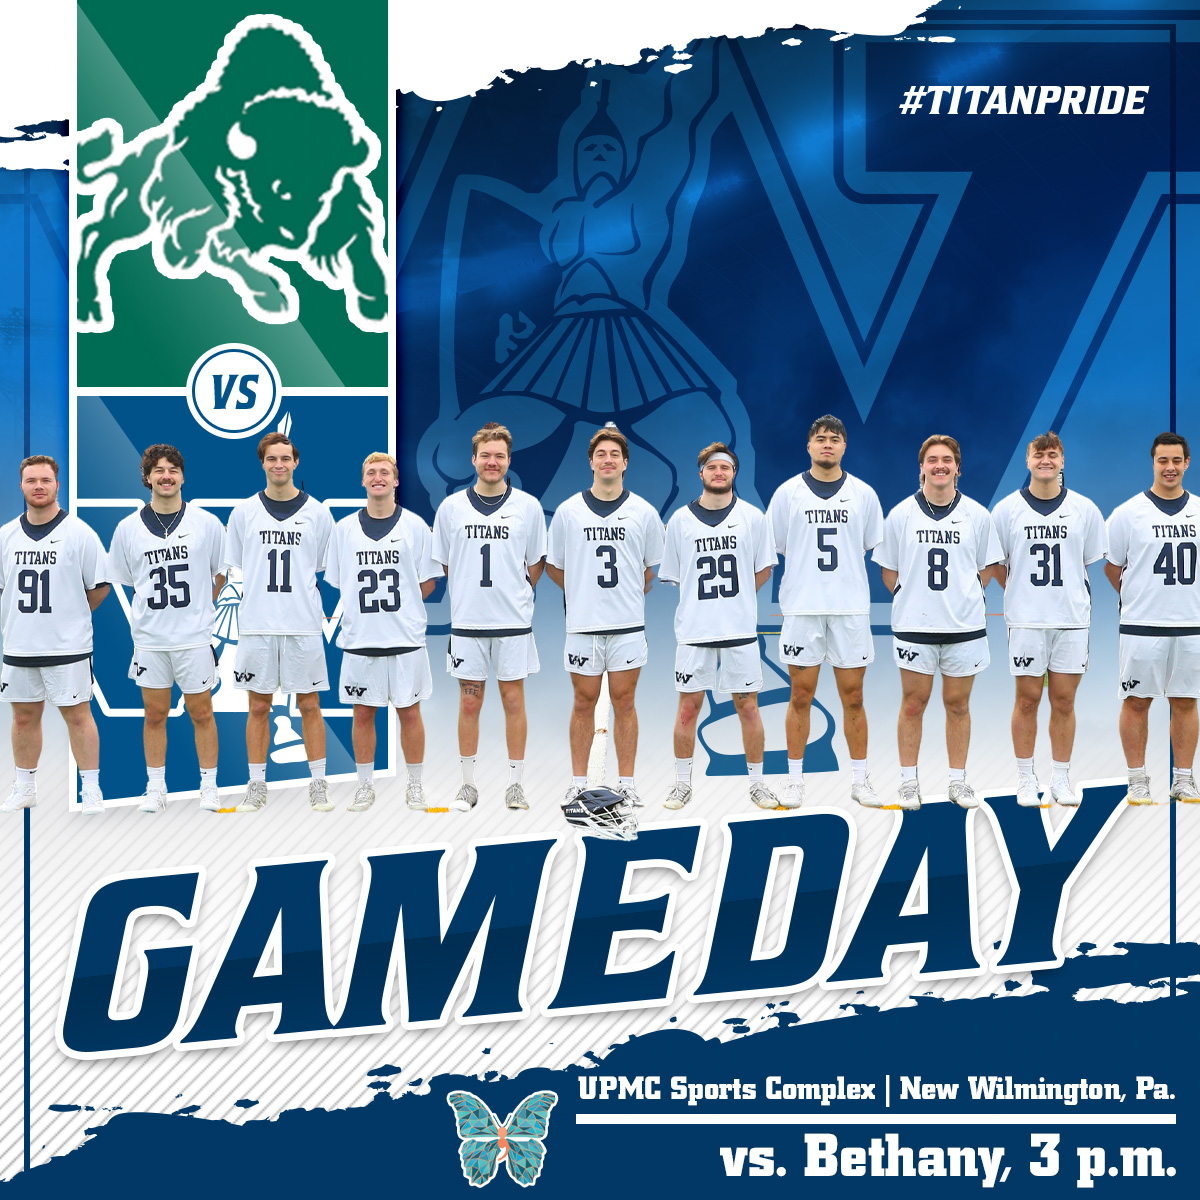 Men's lacrosse celebrates senior day while hosting Bethany at the UPMC Sports Complex. Good luck Titans!

🆚Bethany
🕒3 p.m.
📍New Wilmington, Pa.
📺pacdigitalnetwork.com/westminster/?B…

#d3mlax #pacmlax #titanpride⚔️